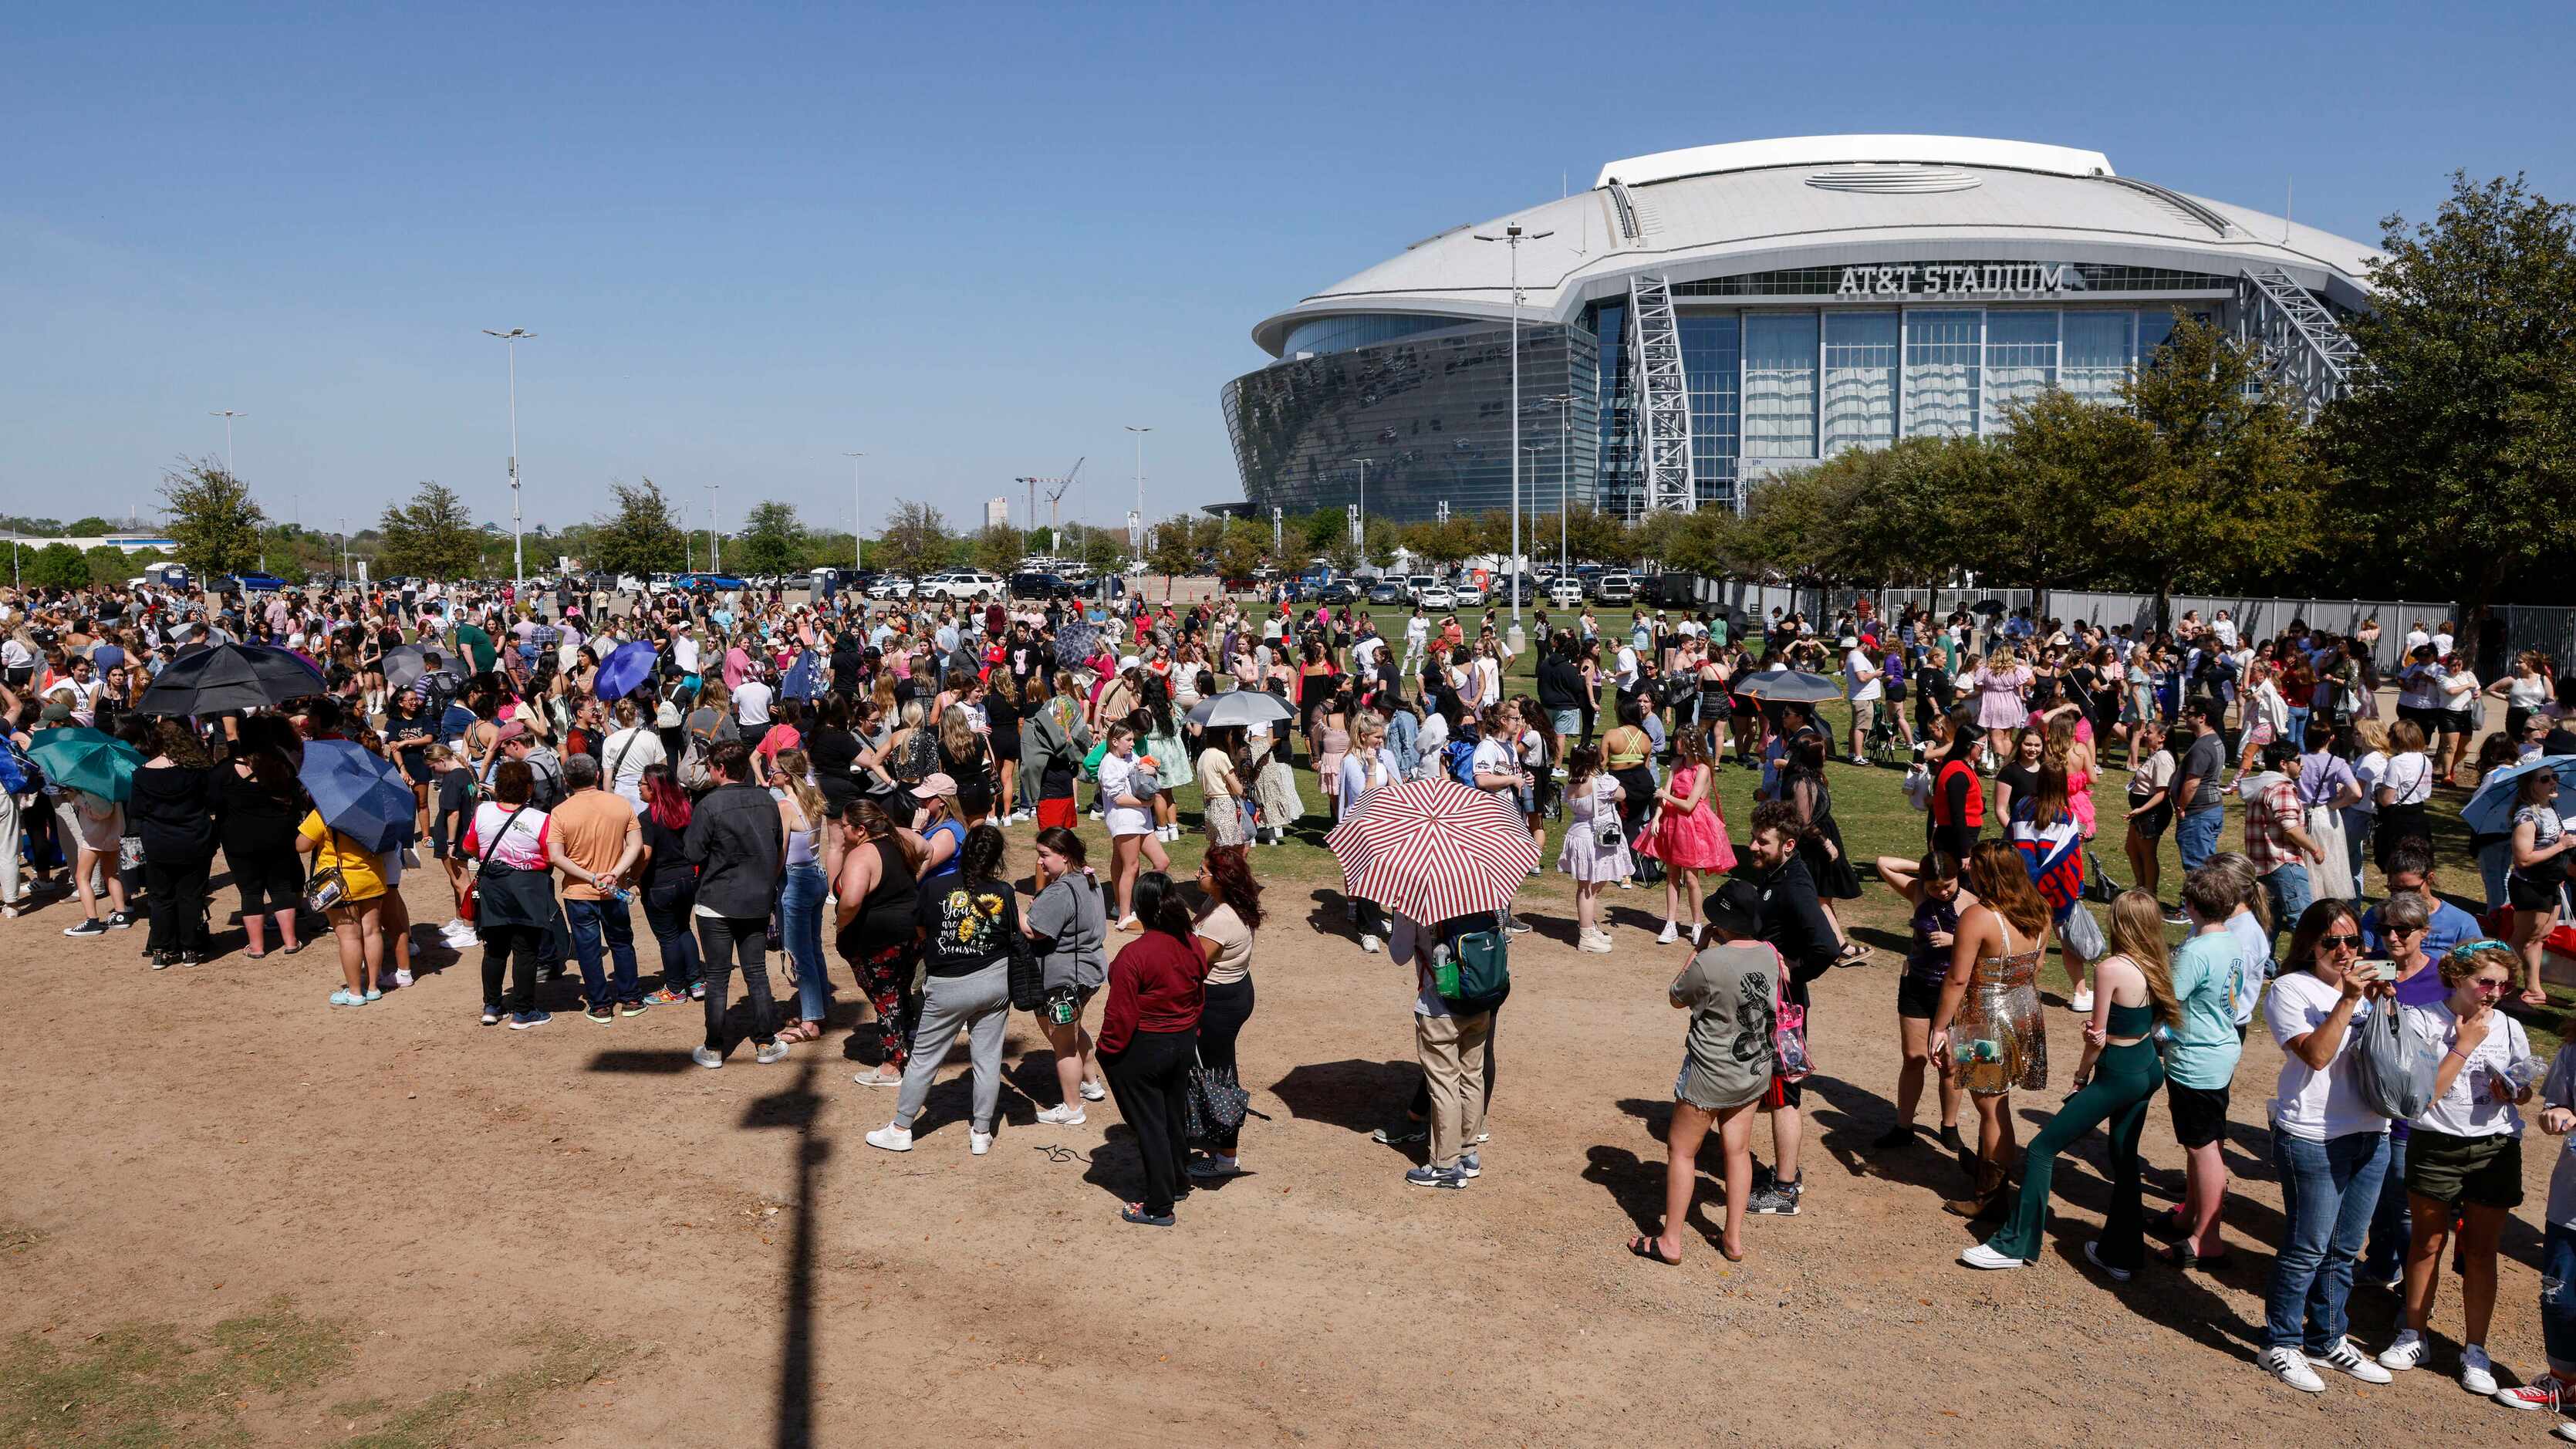 Fans wait in line to buy merchandise before a Taylor Swift Eras Tour concert at AT&T Stadiums.